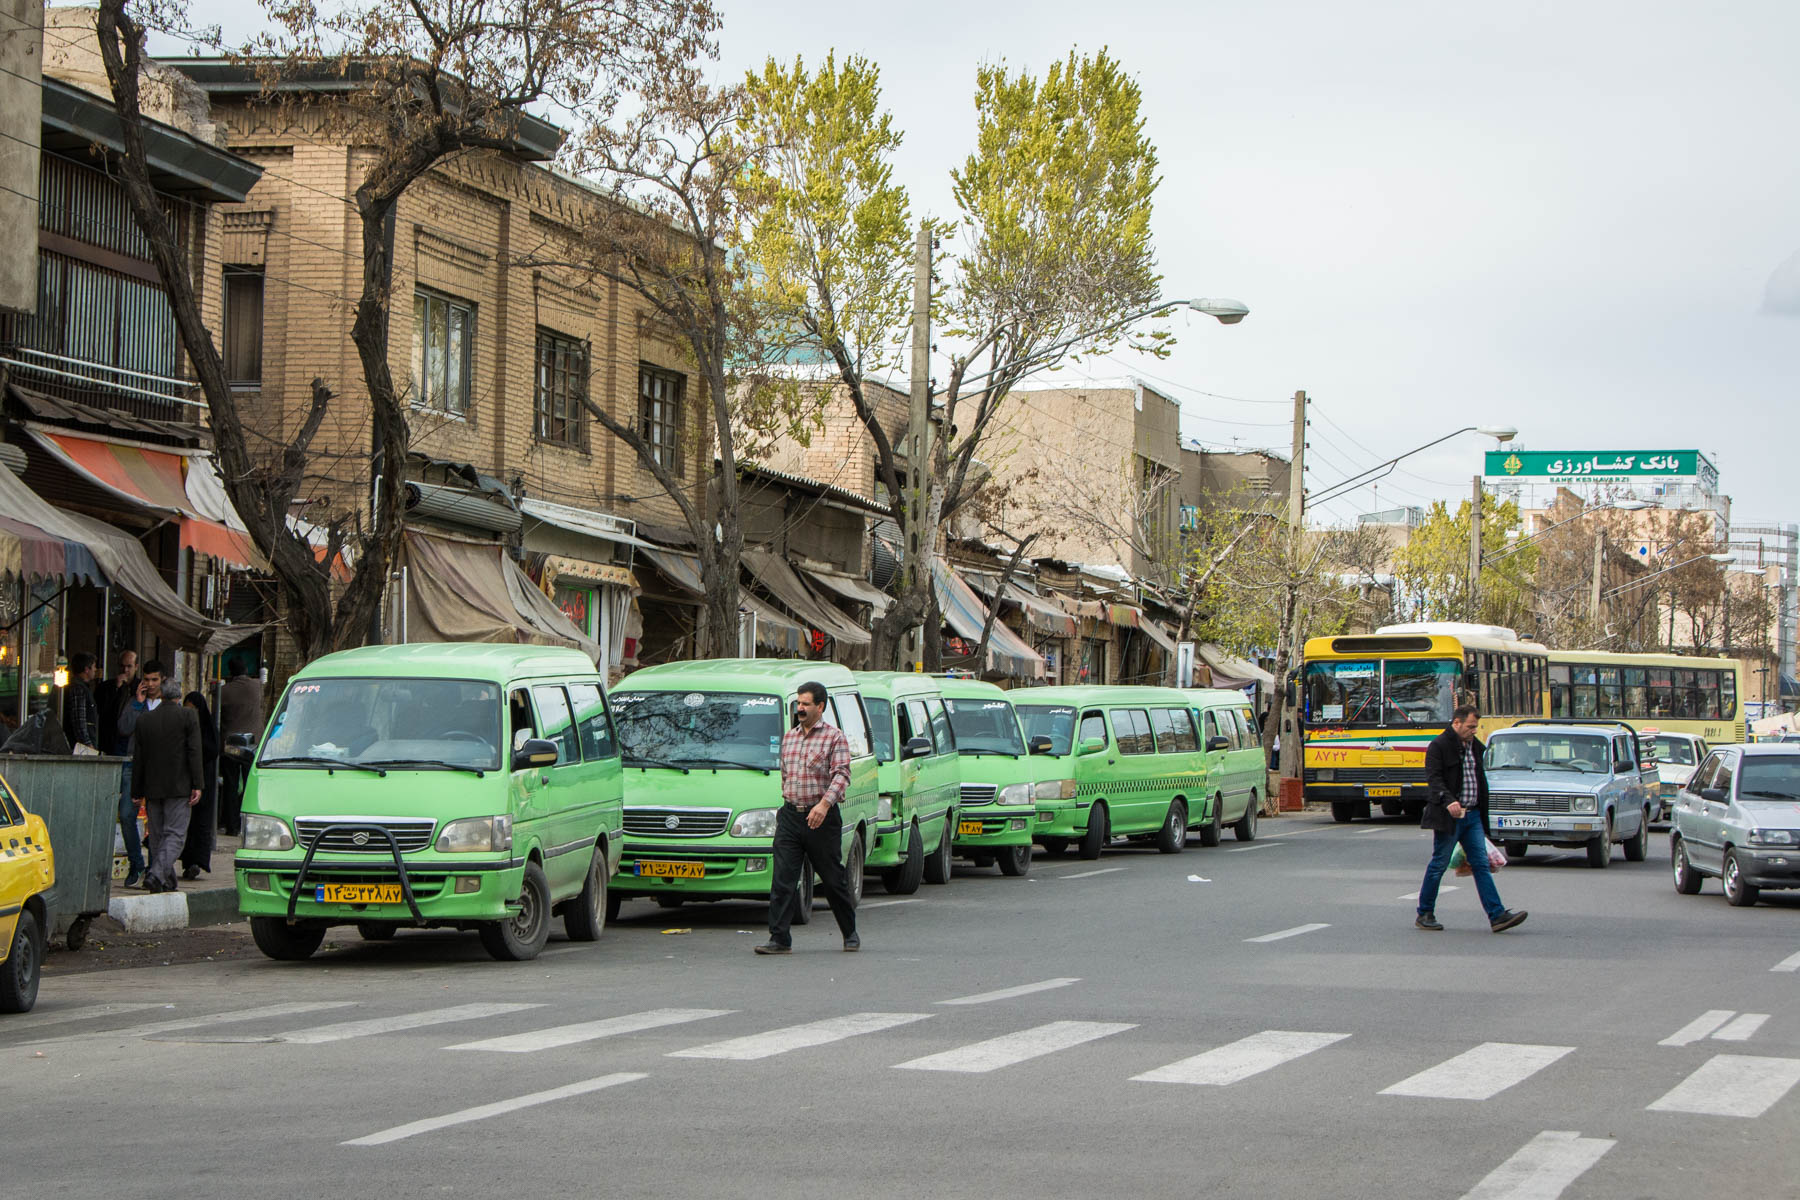 Zanjan shuttles that are part of how to get to Soltaniyeh from Zanjan, Iran